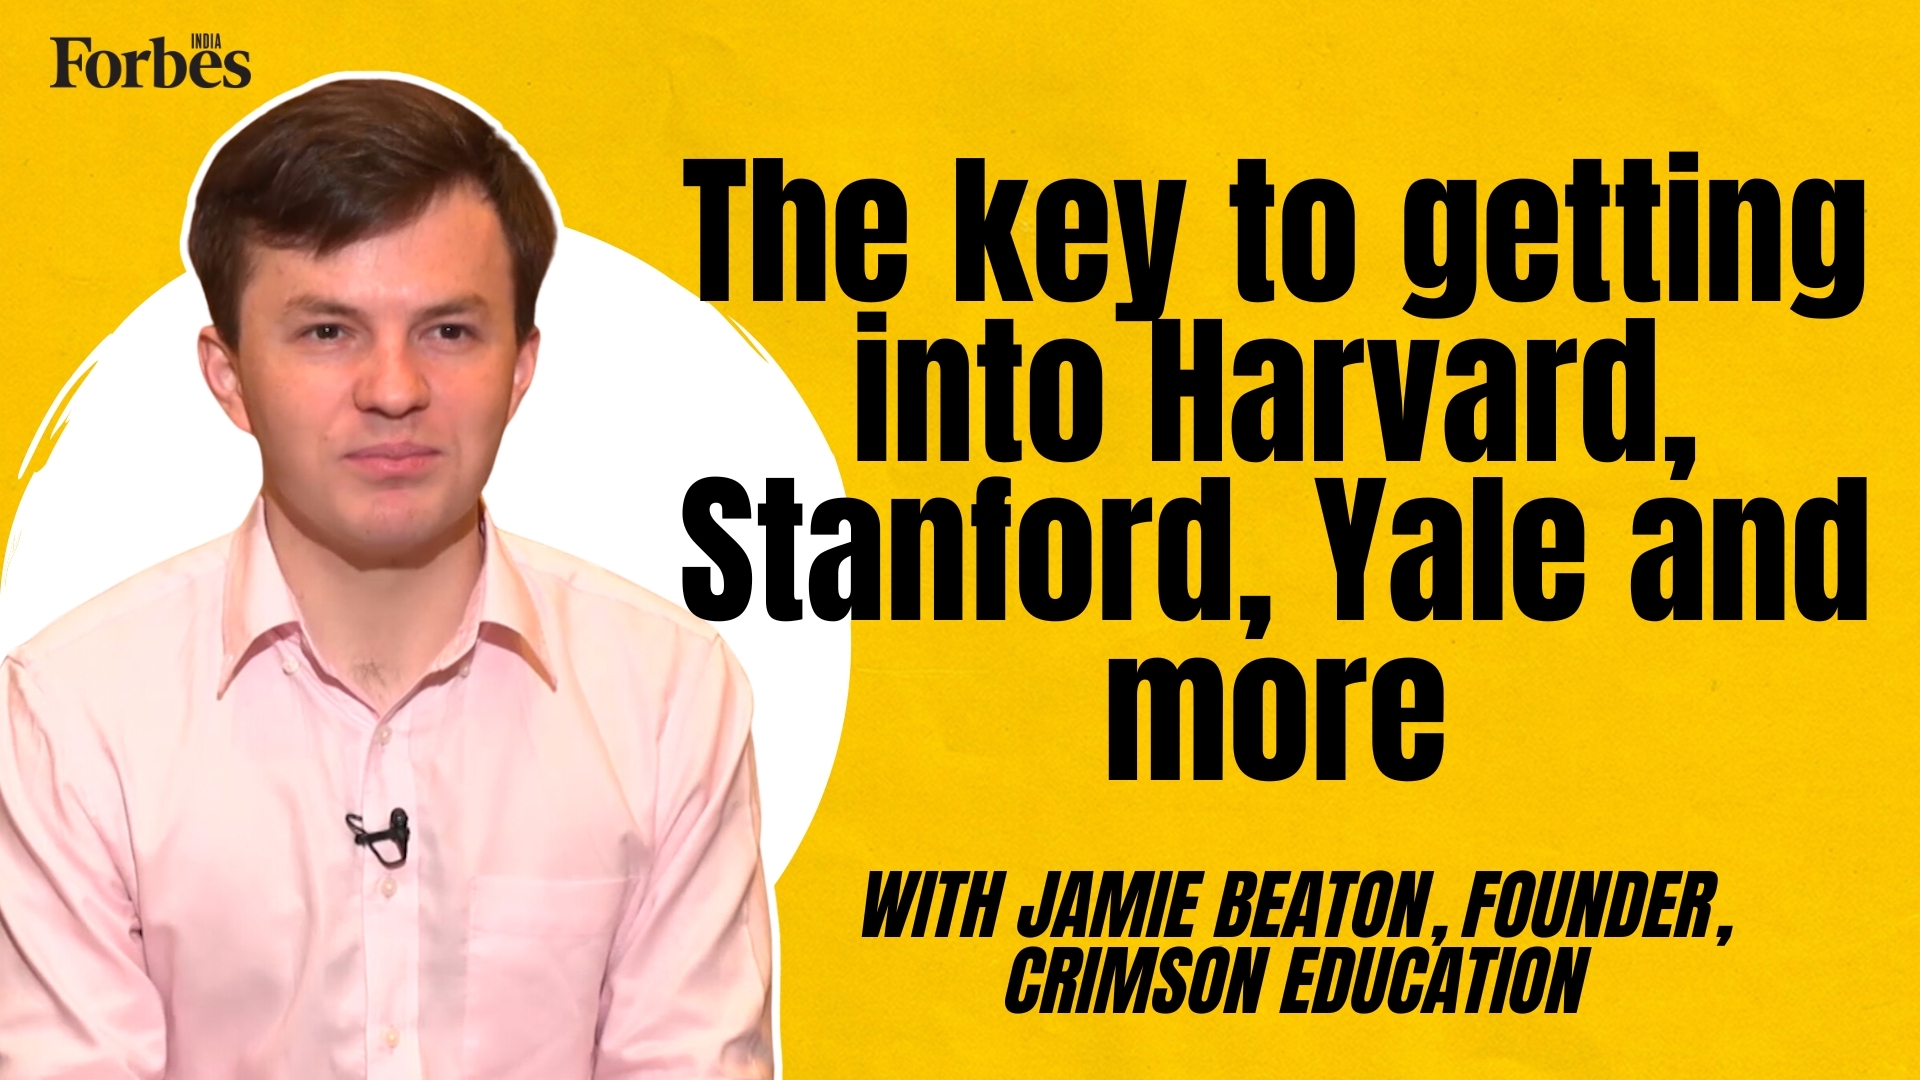 The key to admission into Harvard, Stanford, Yale and more, with Jamie Beaton